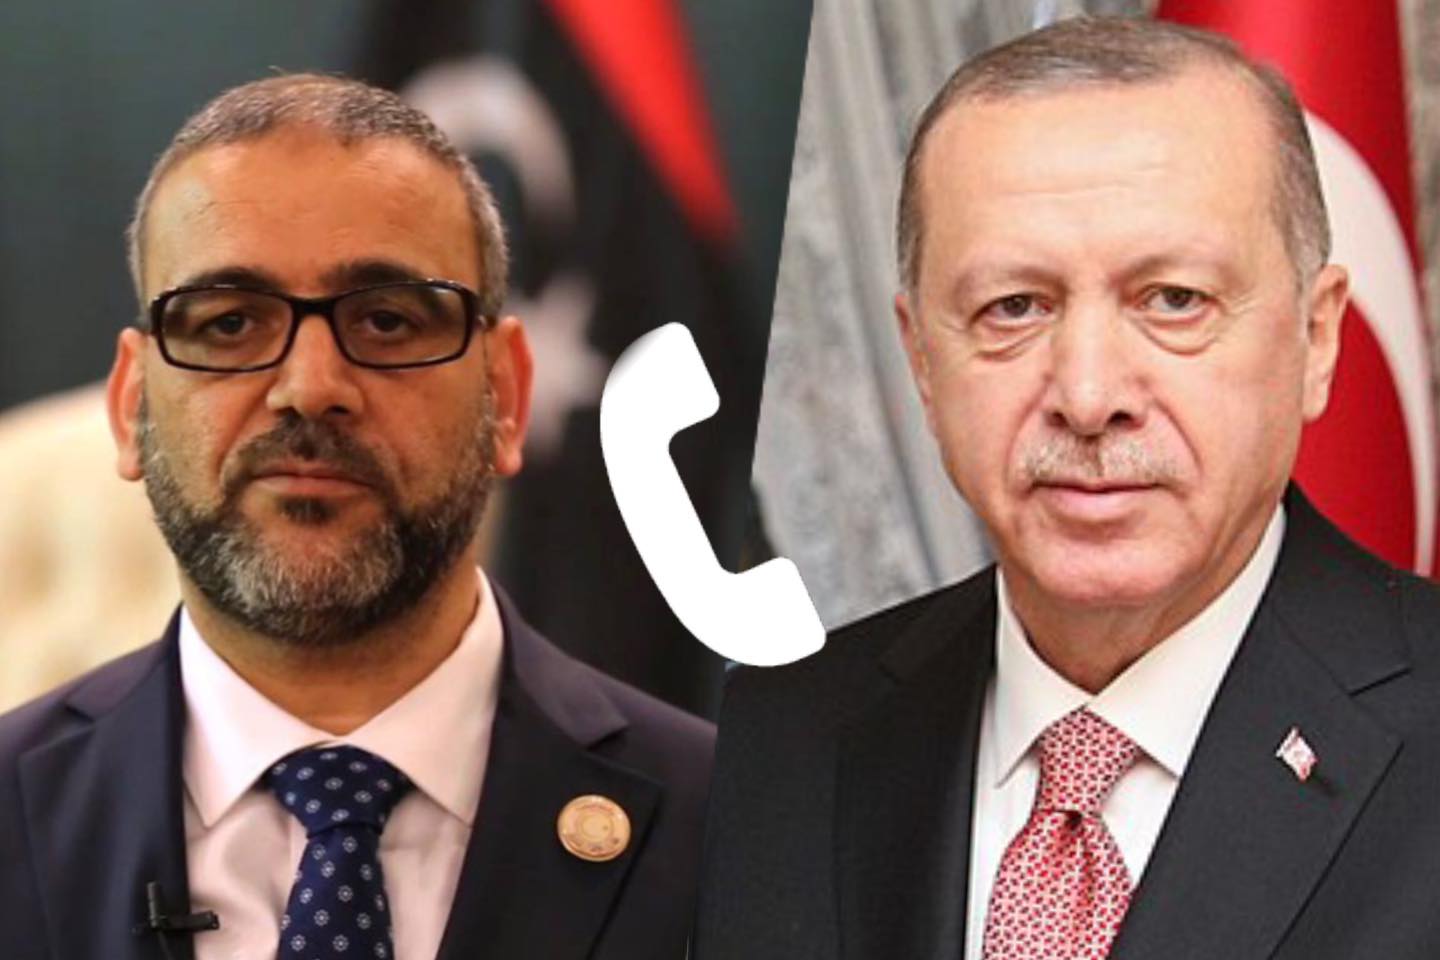 Al-Mashri and the Turkish President discuss by phone the common issues between the two countries.